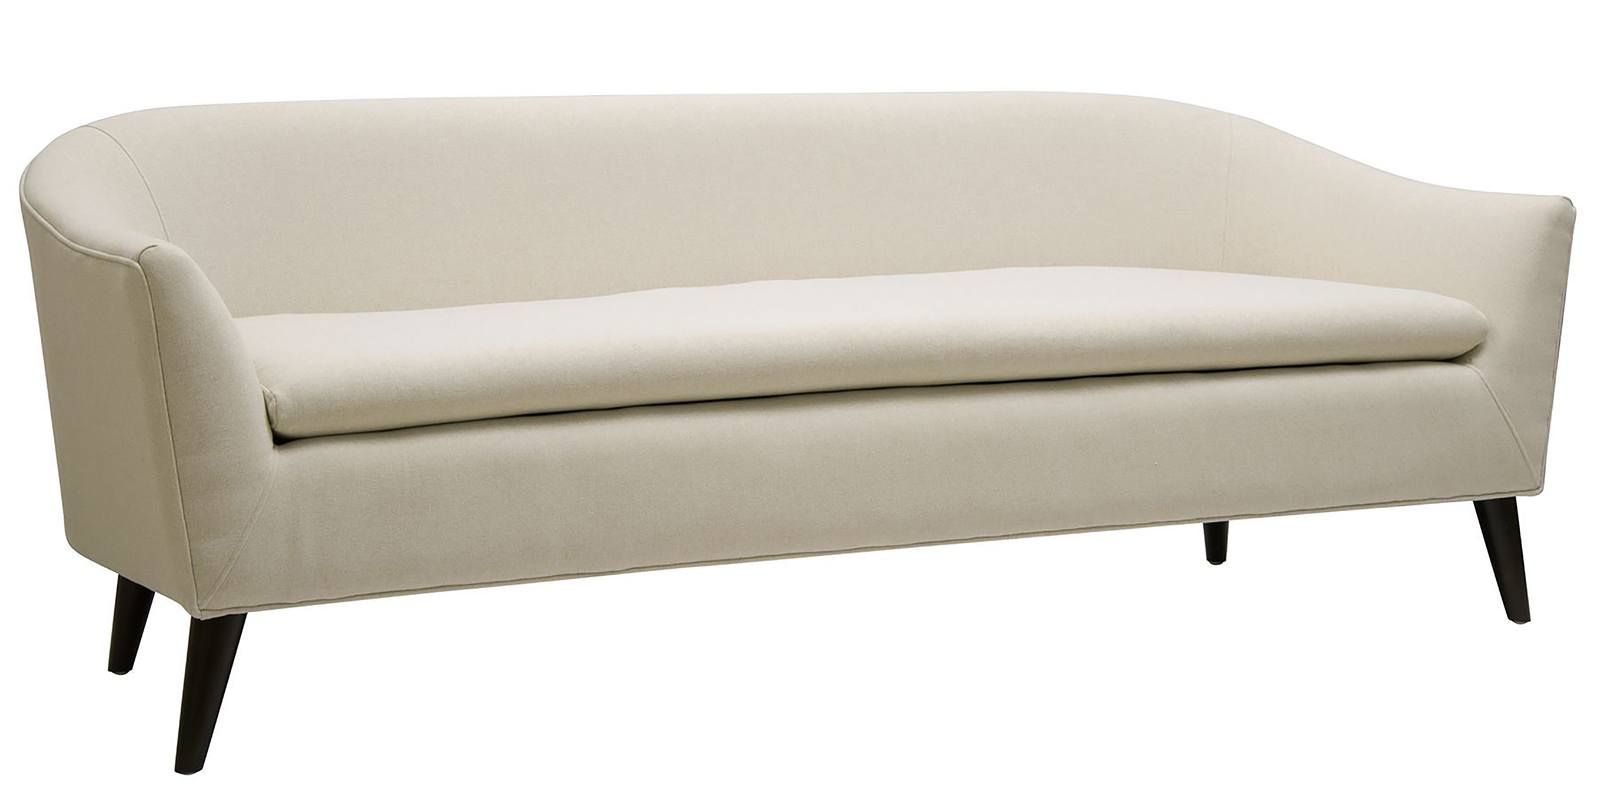 Classiest Mid Century Three Seater Sofa In White Colour – Dreamzz In Mid Century 3 Seat Couches (View 6 of 20)